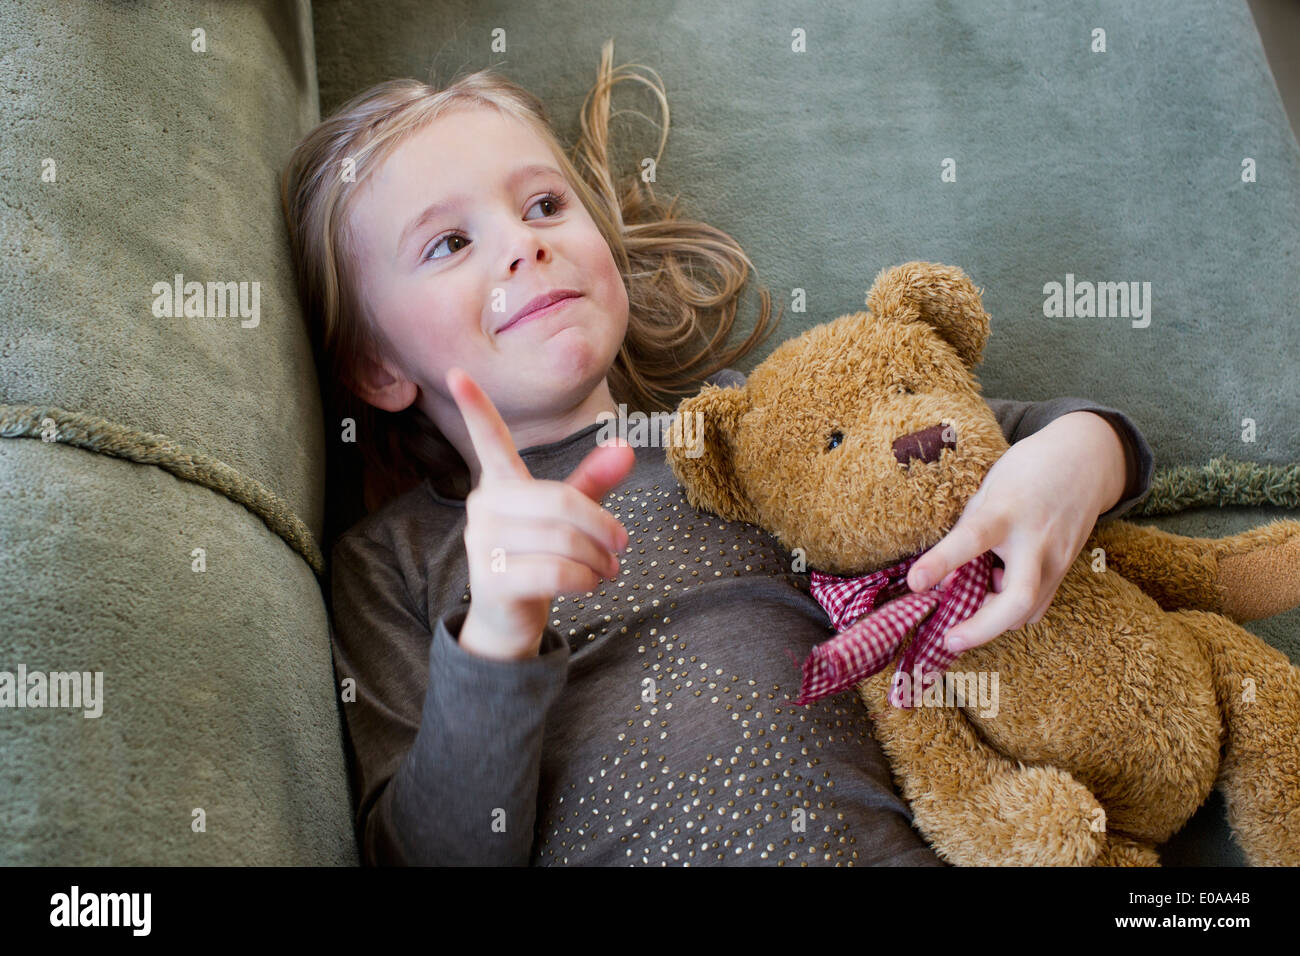 Young Girl lying on sofa avec son ours en peluche Banque D'Images